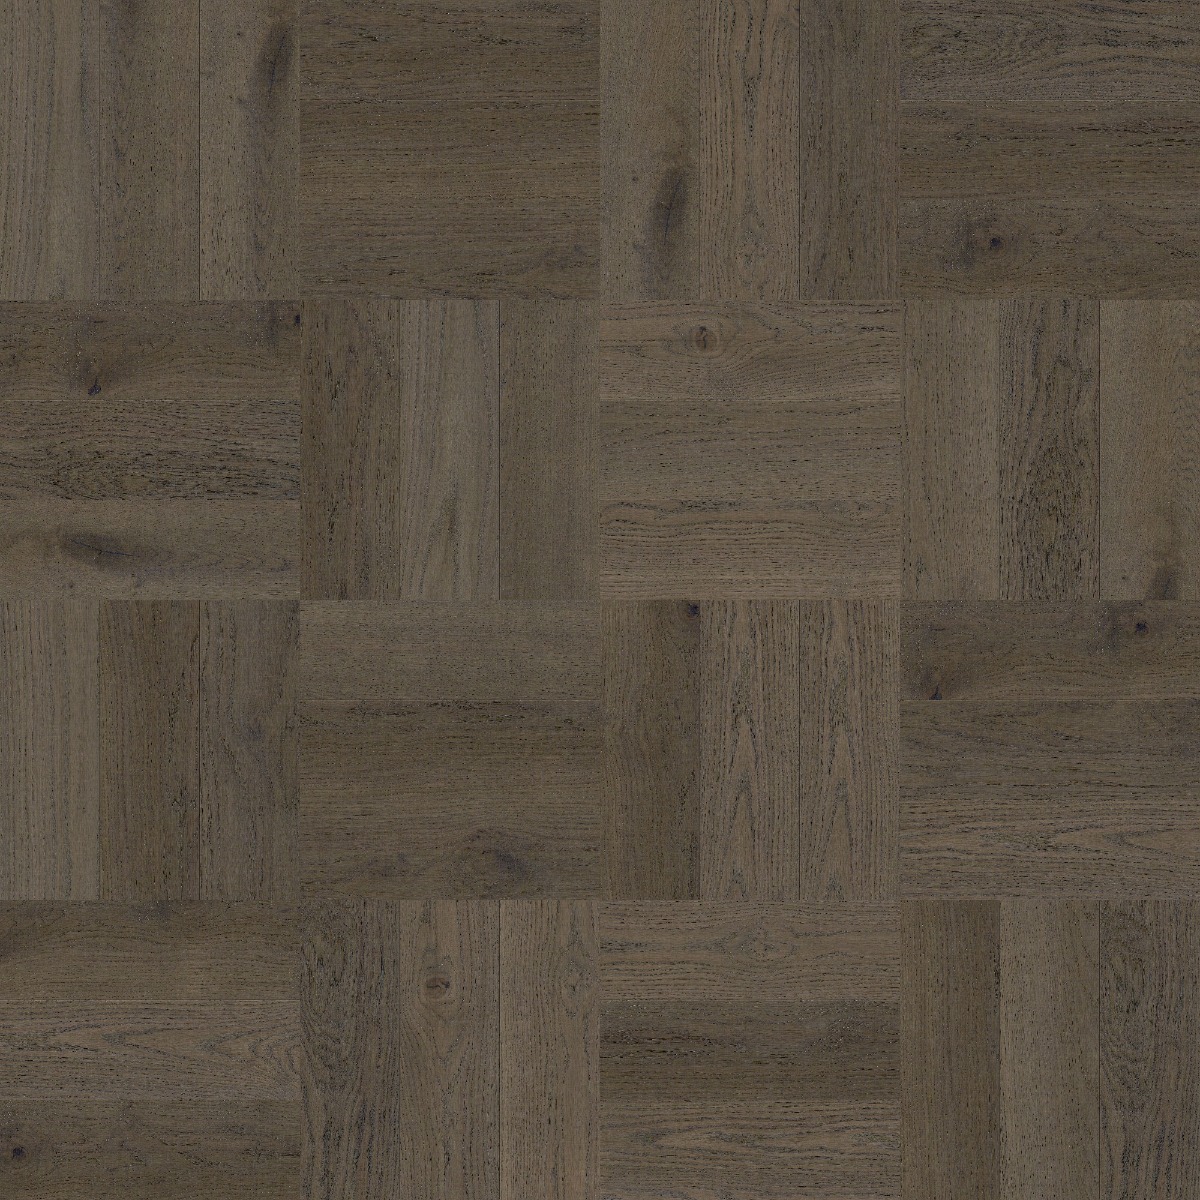 A seamless wood texture with creative oak 4219 boards arranged in a Basketweave pattern